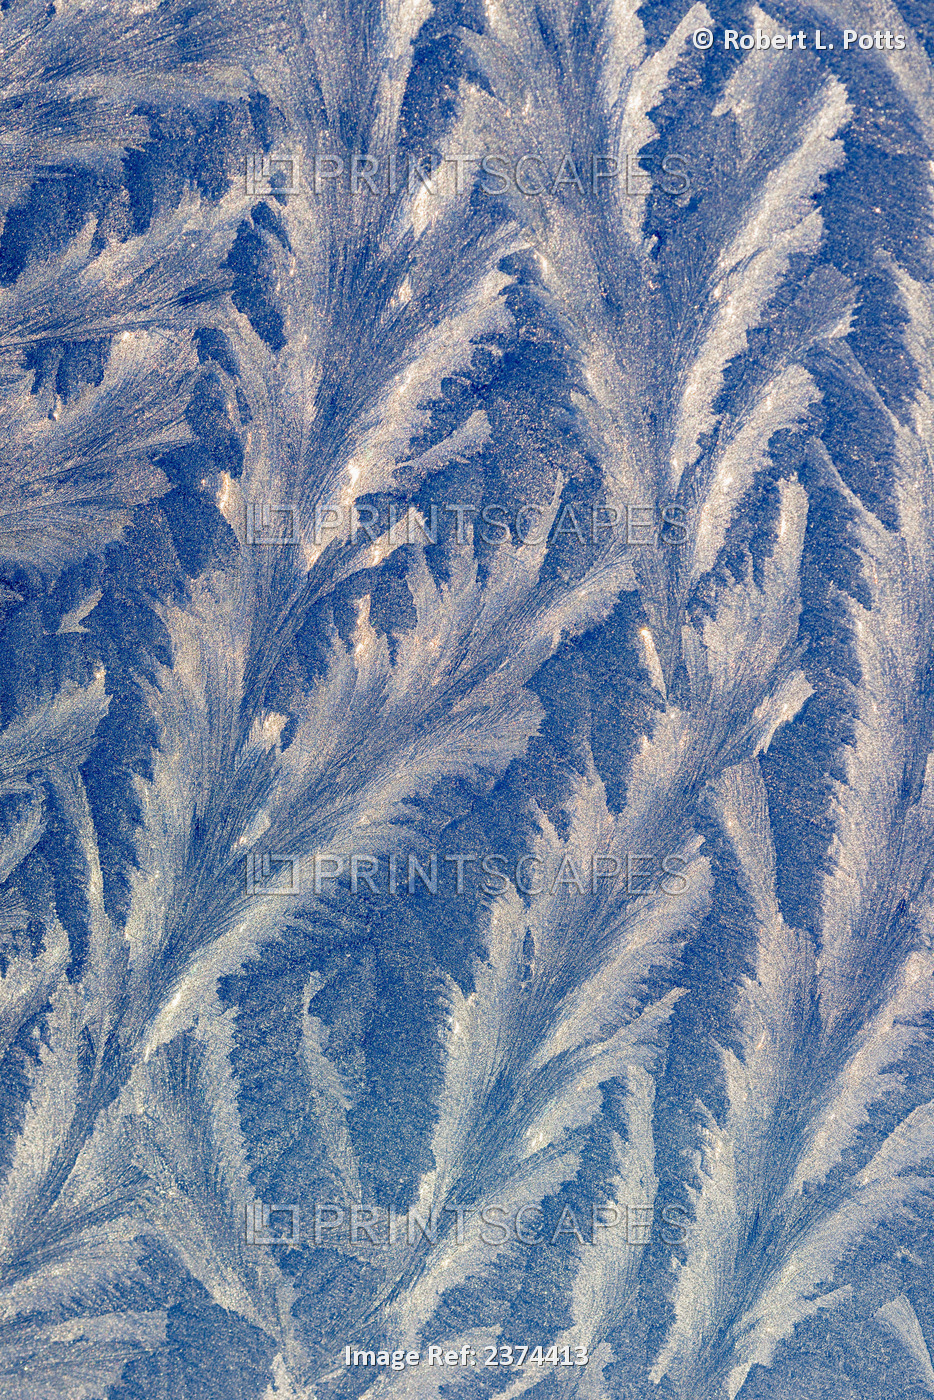 Frost Makes Patterns On A Car Window; Astoria, Oregon, United States Of America